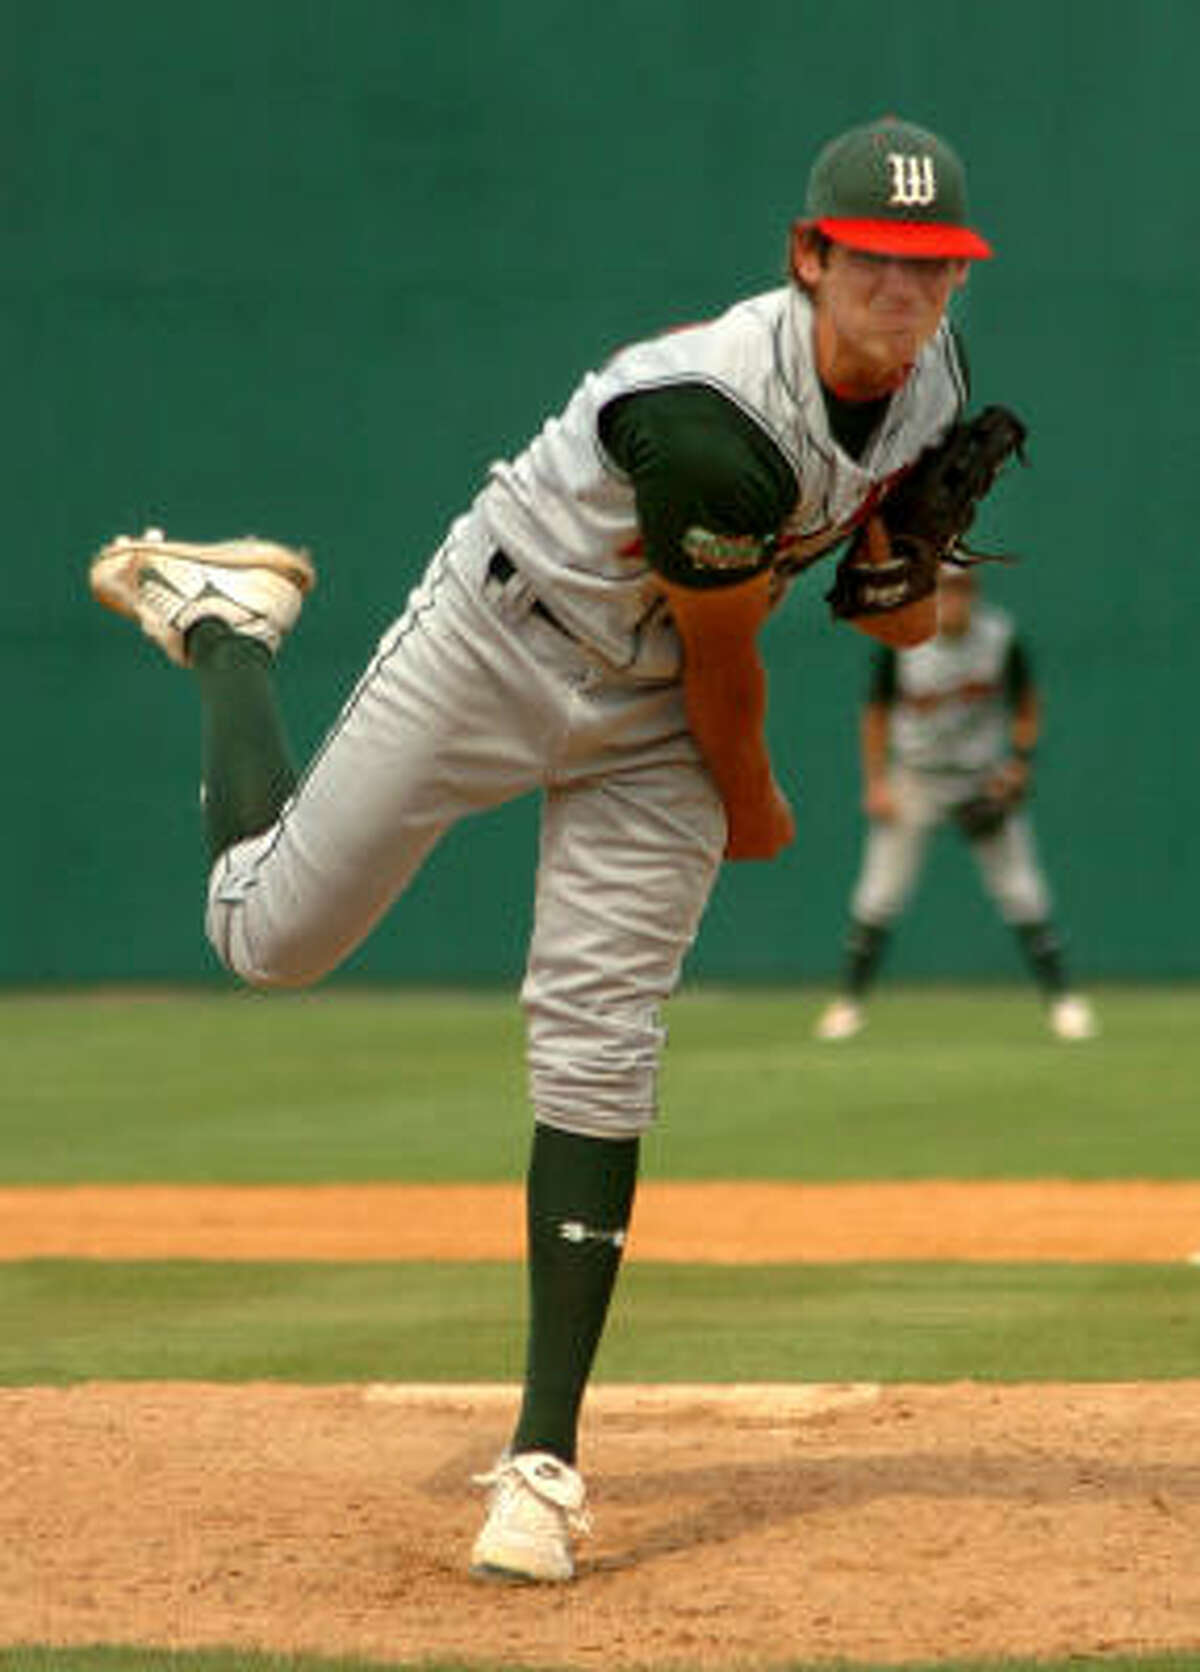 The Woodlands pitcher Brett Eibner will pitch at the University of Arkansas next season instead of in the Astros organization.